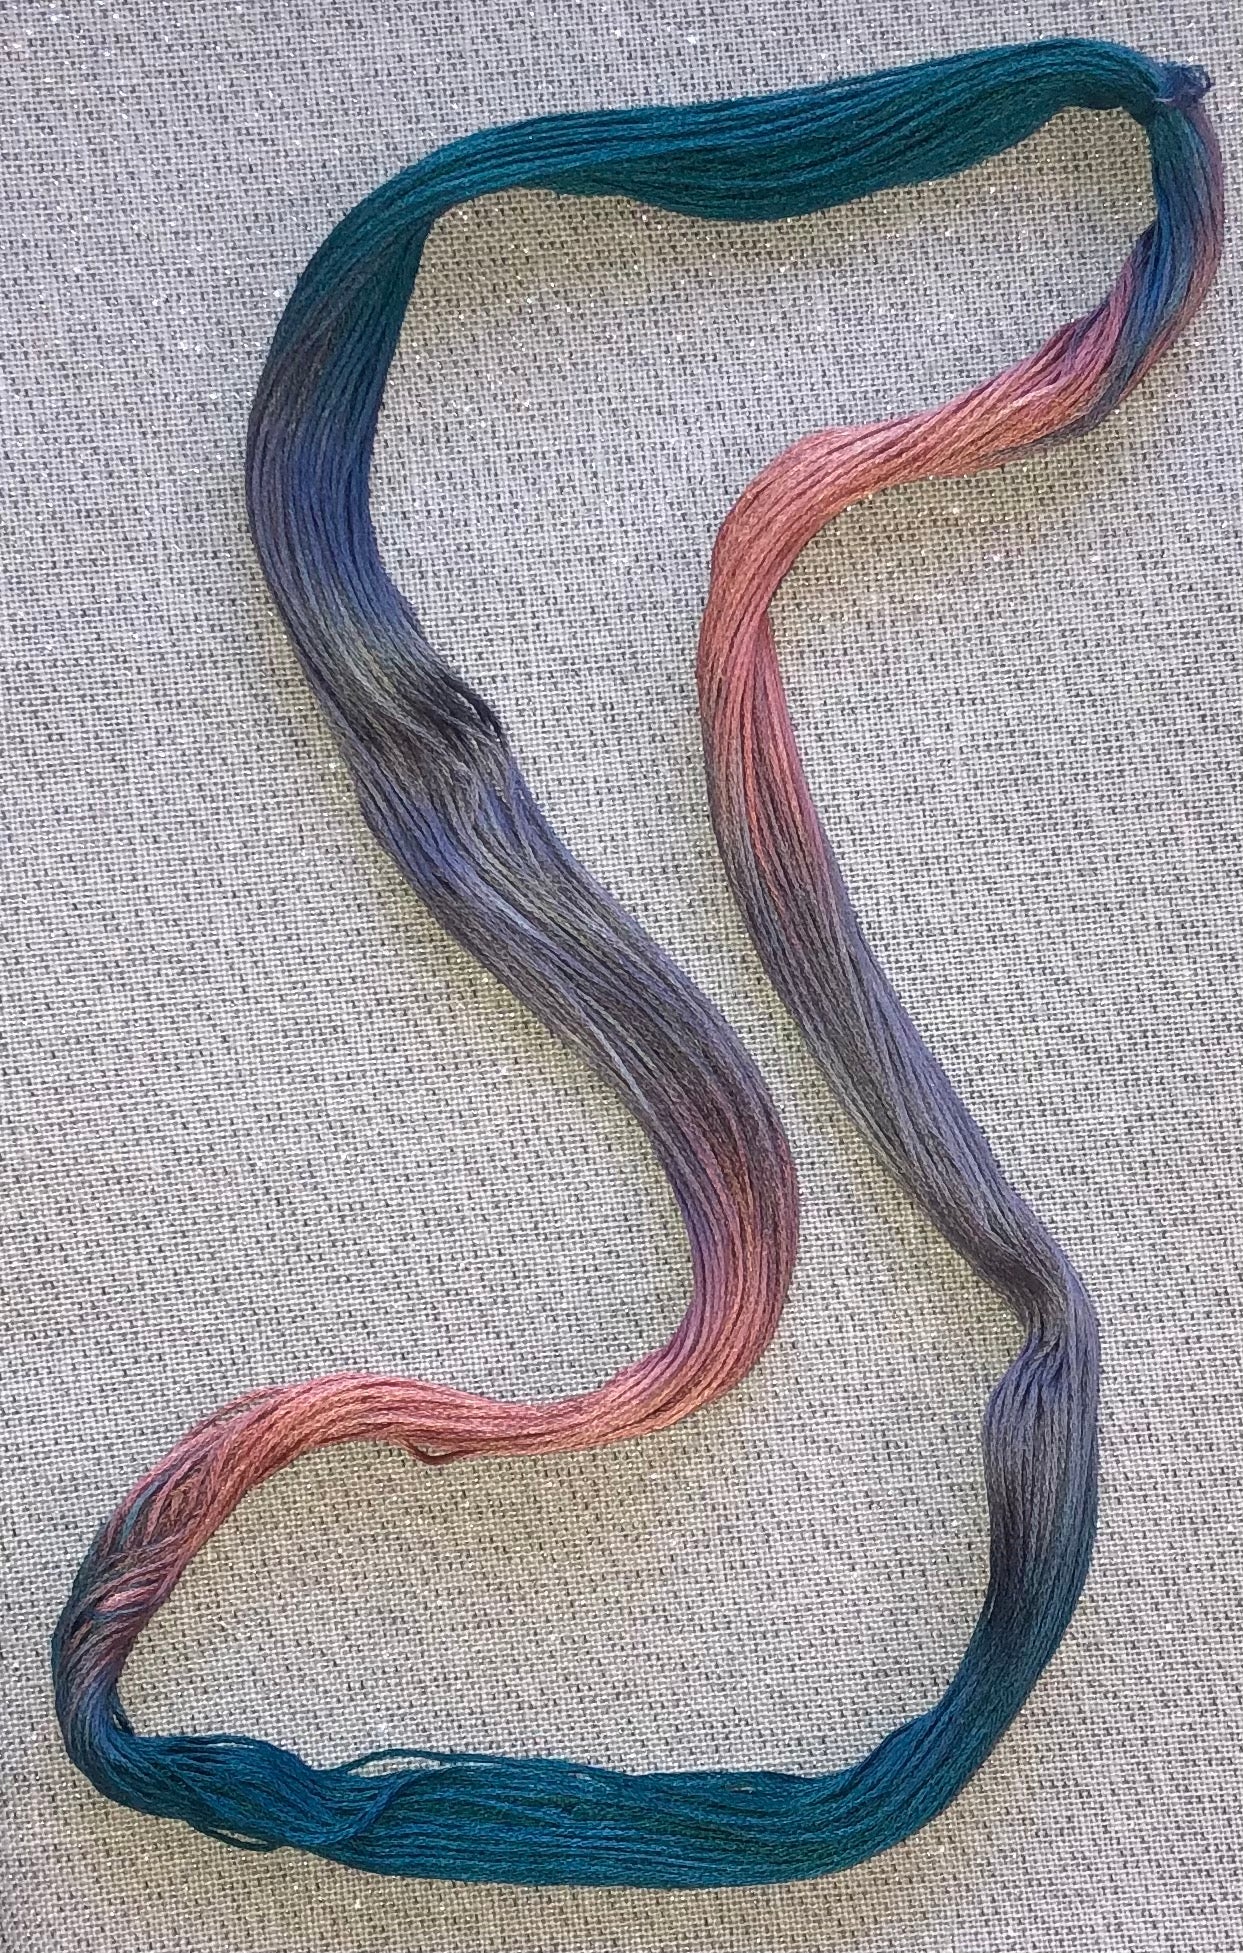 Silk hand dyed floss - Hazy Horizons - Dyeing for Cross Stitch